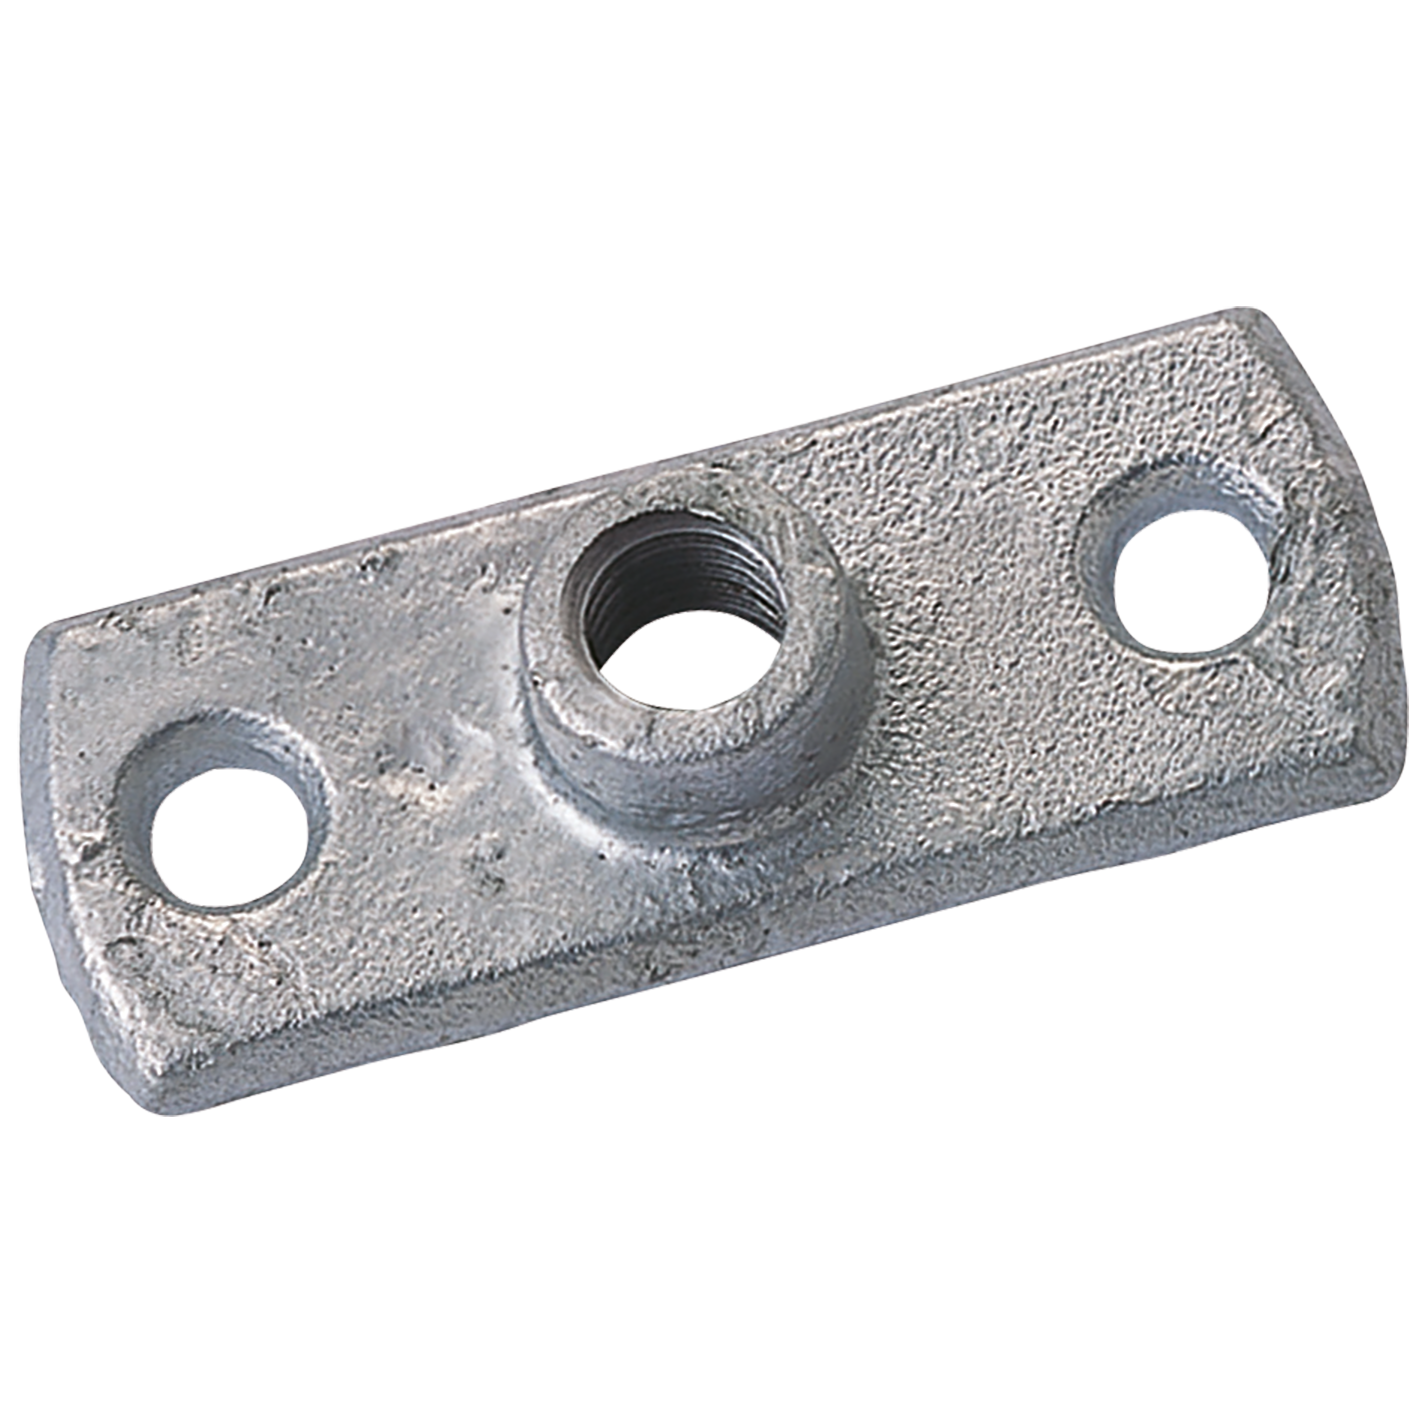 M10METRIC TAPPED BACKPLATE FIG515 GALVANISED